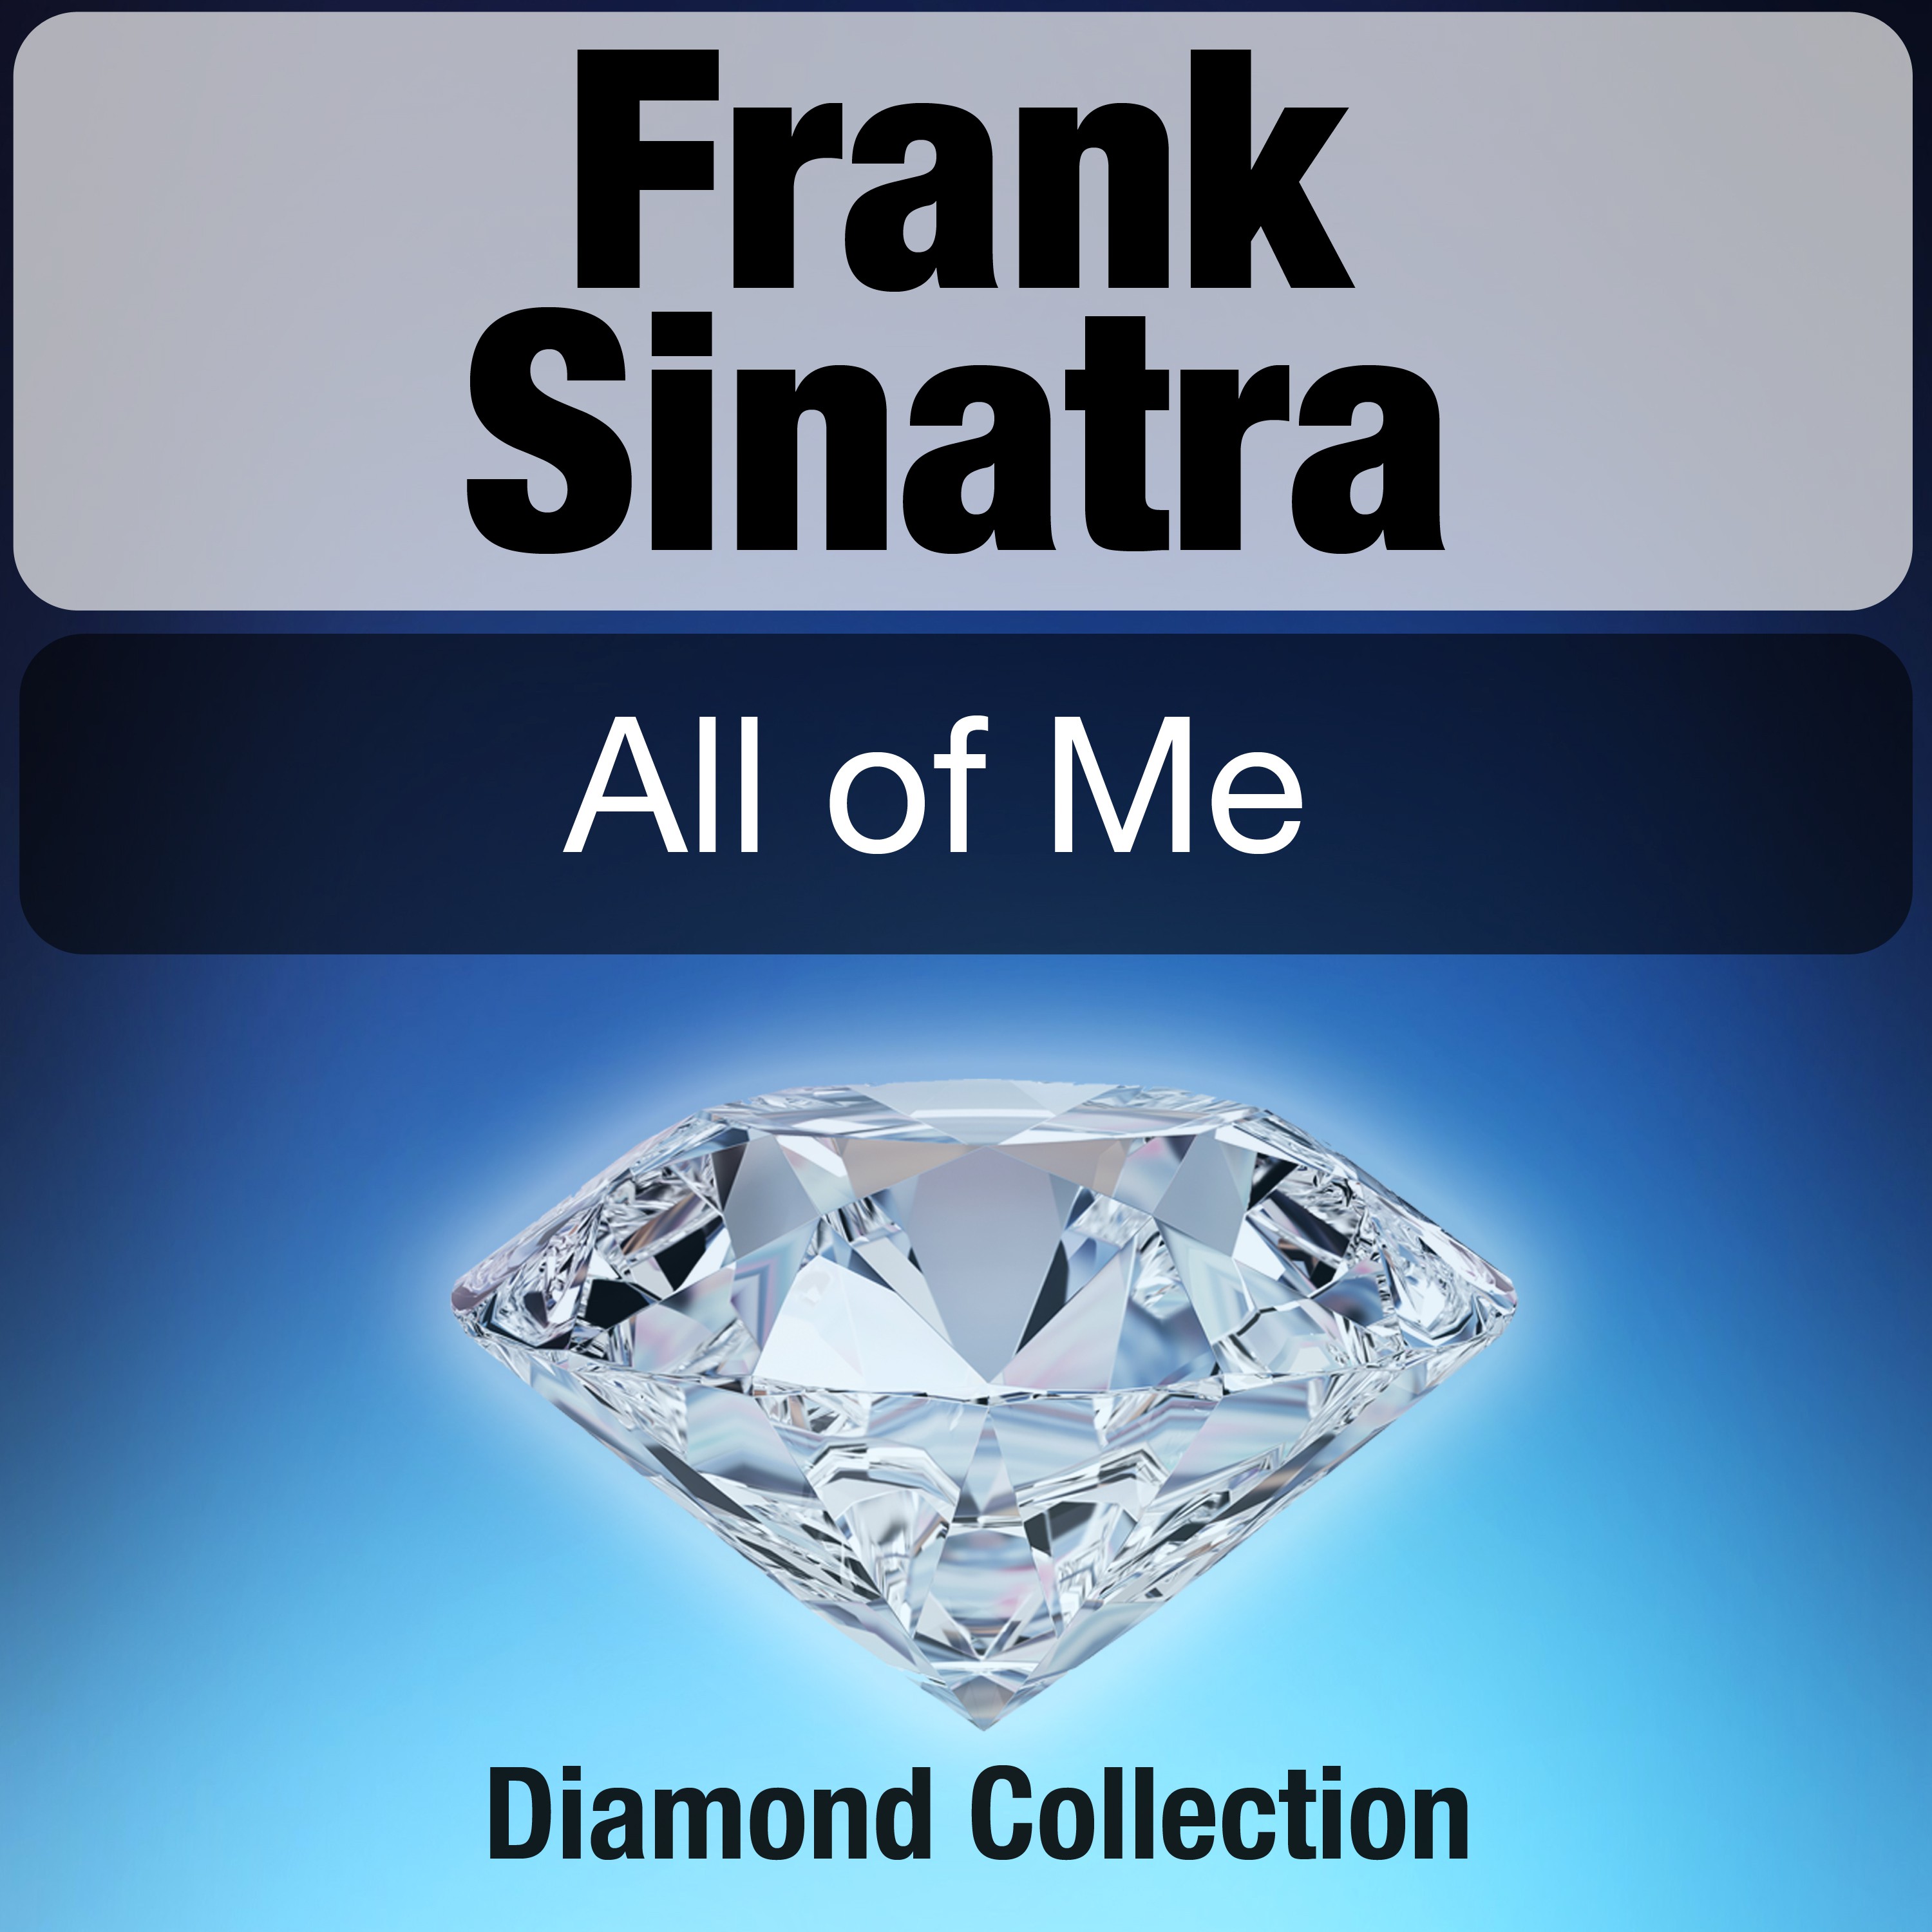 All of Me (Diamond Collection)